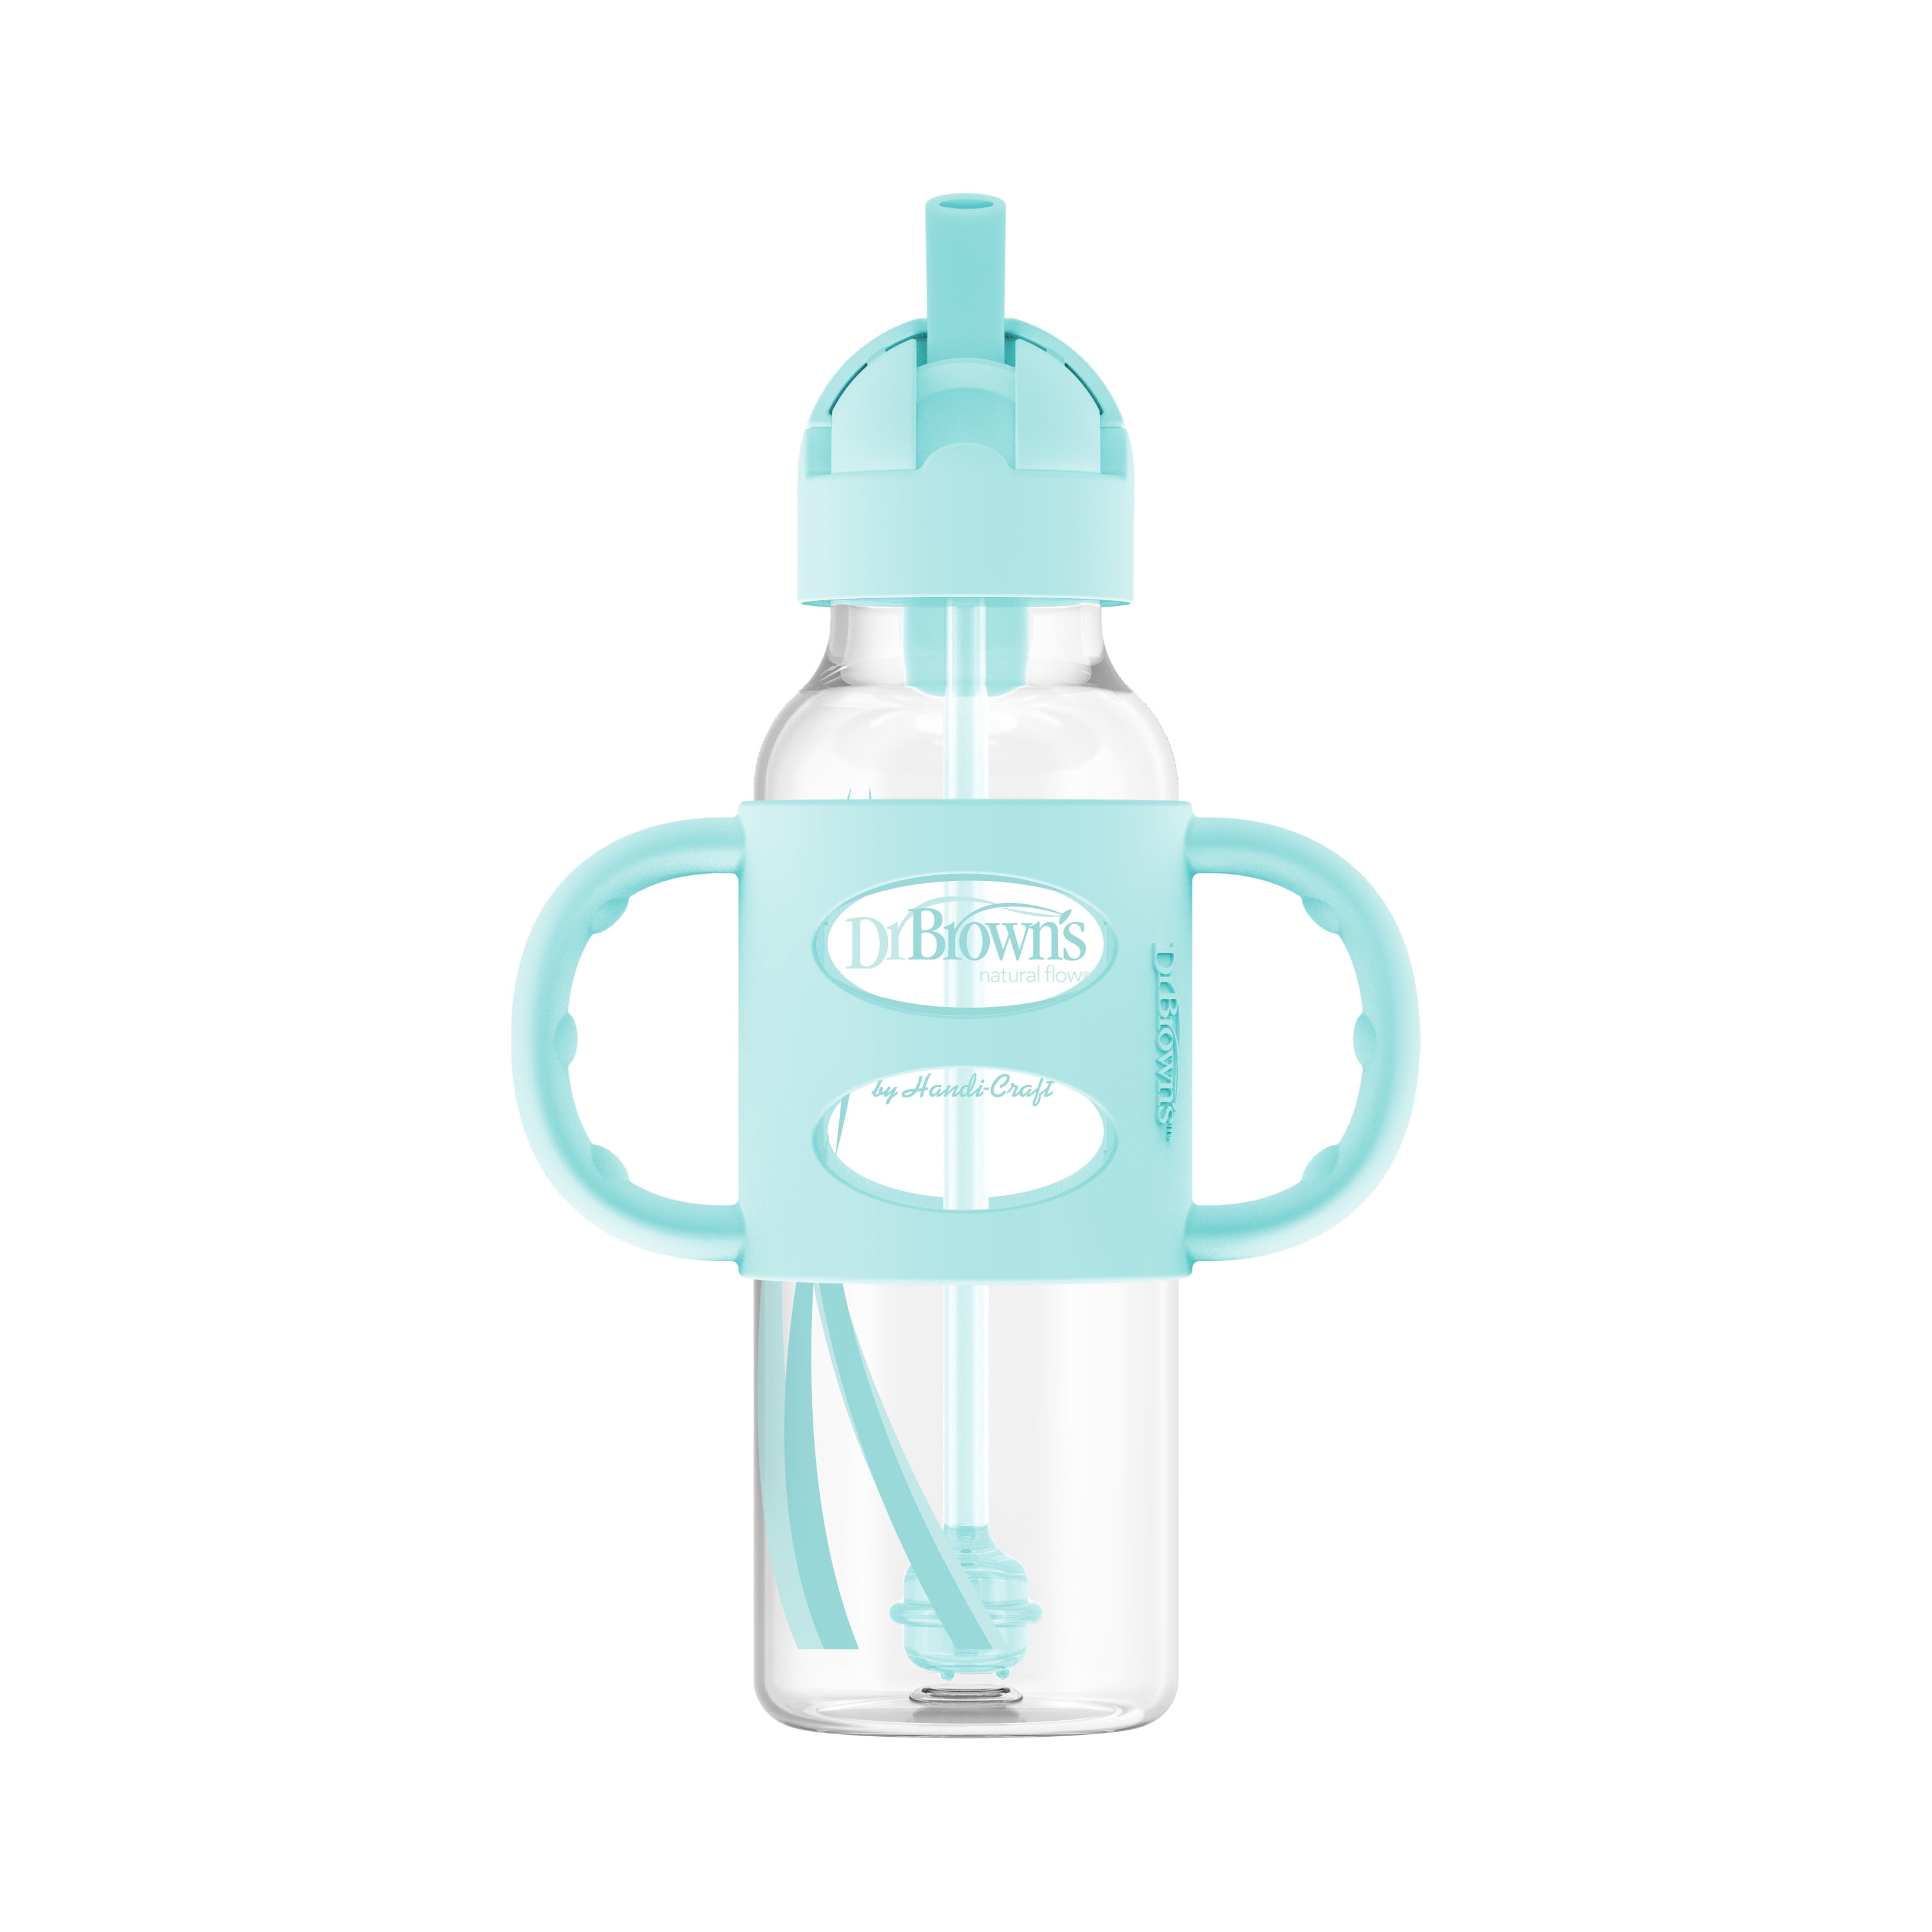 Dr. Brown's Milestones Sippy Straw Bottle with Silicone Handles - Green - 8oz